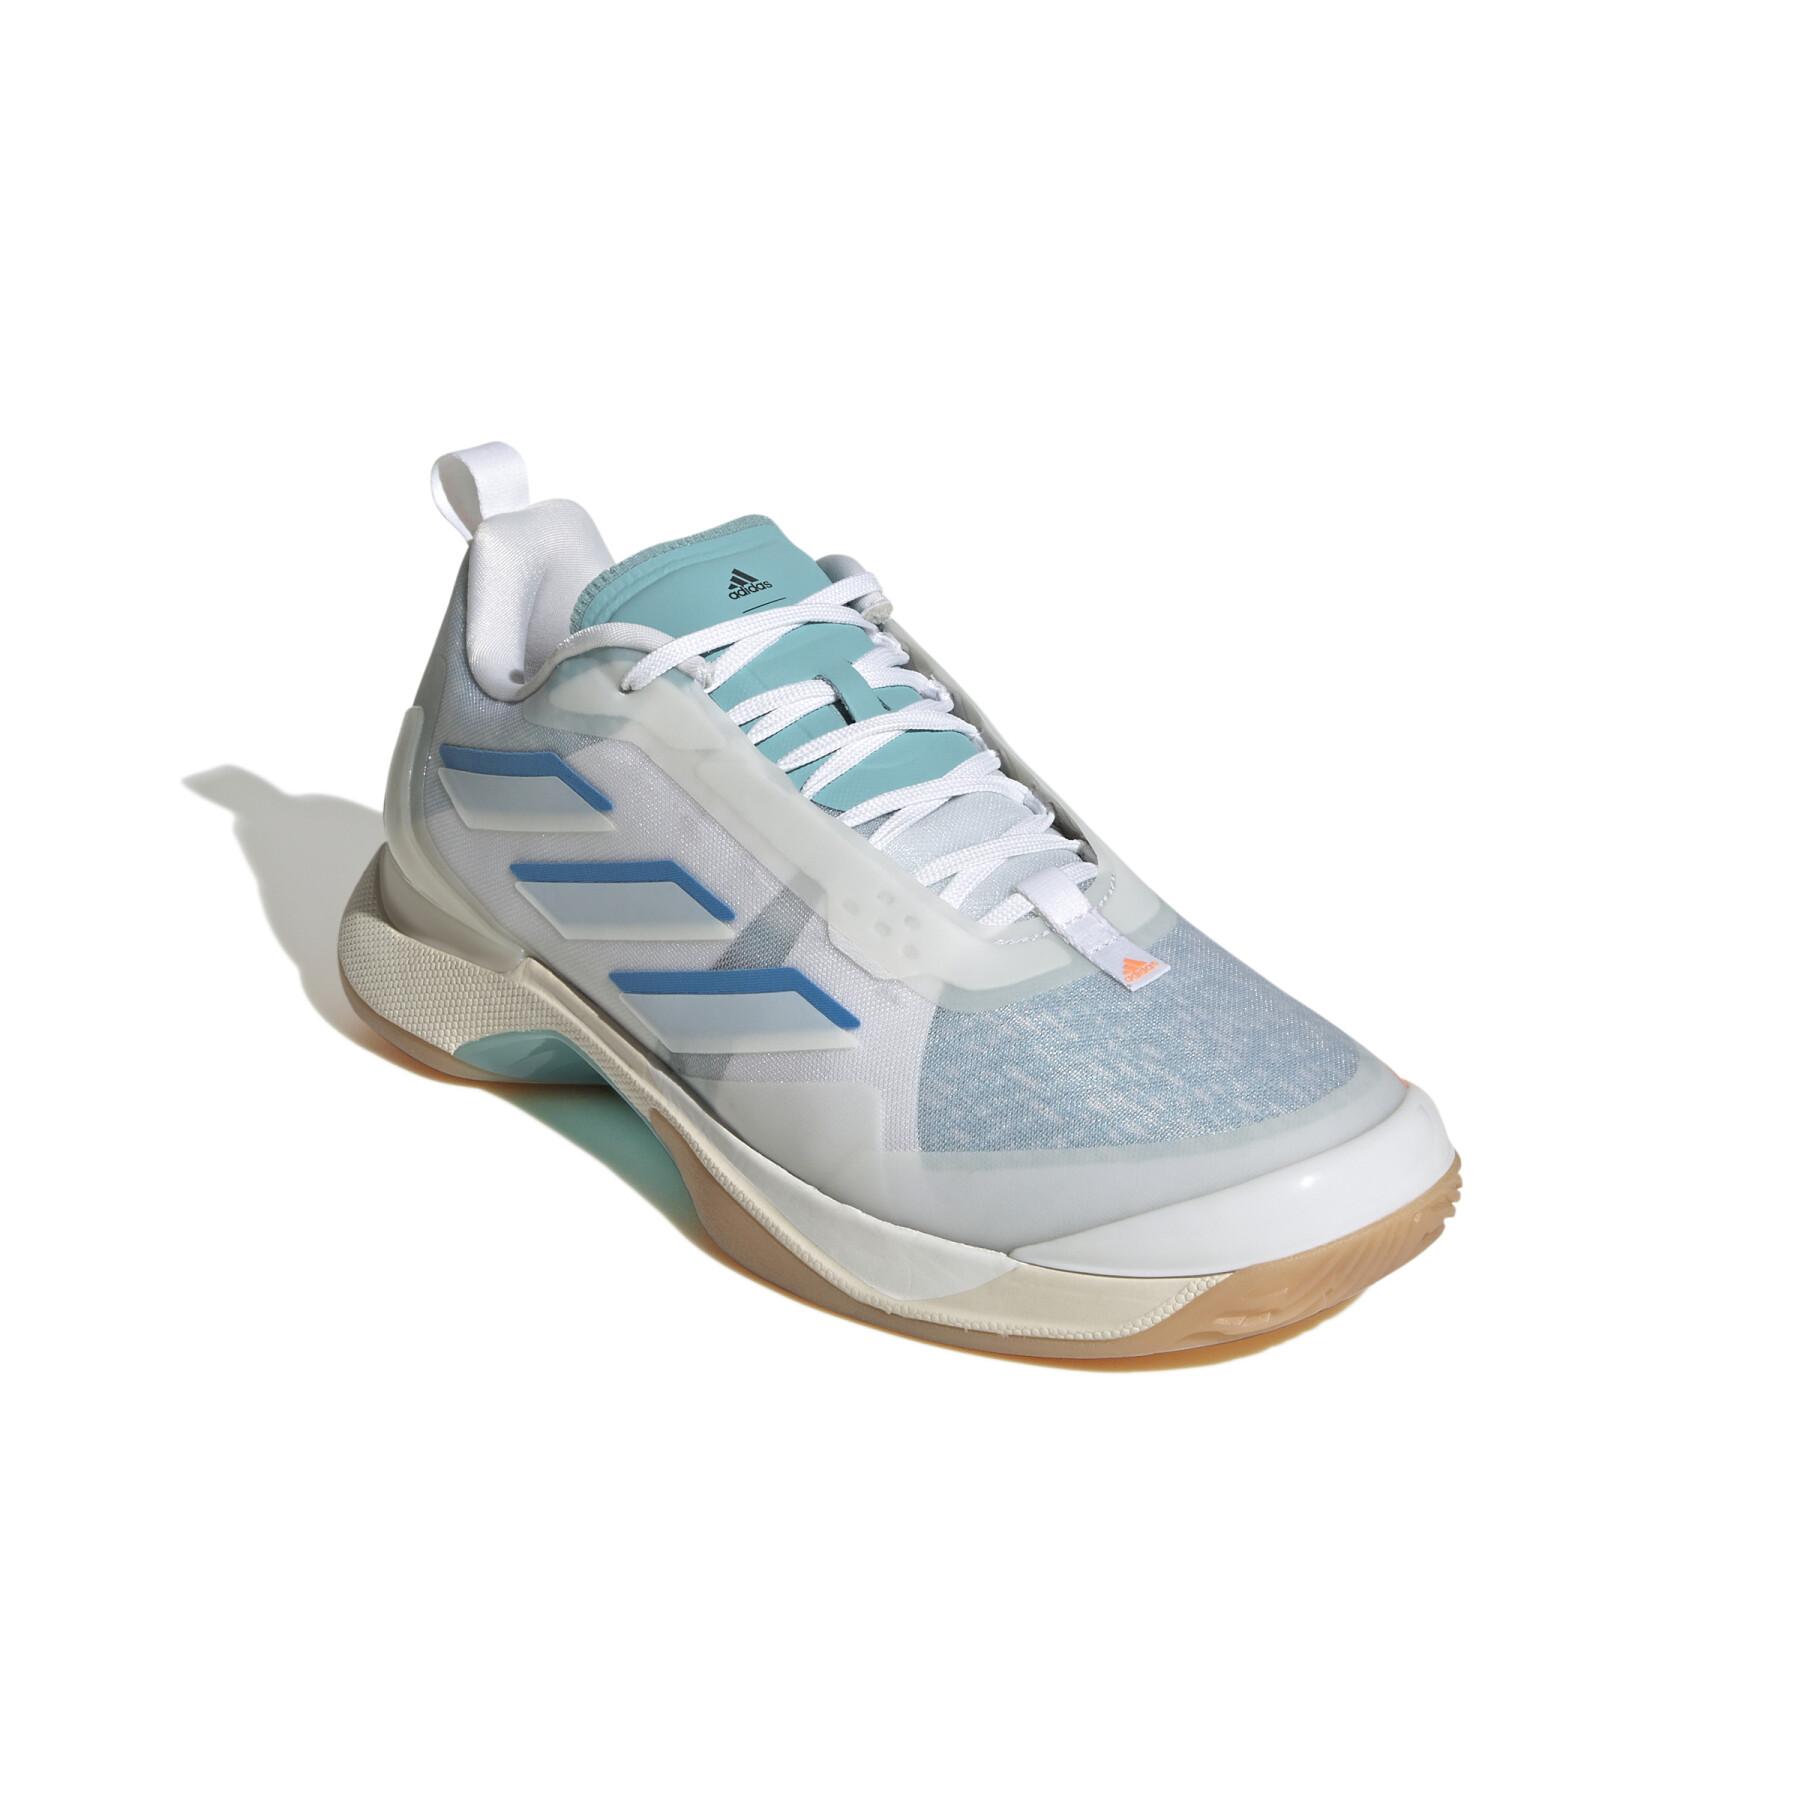 Women's tennis shoes adidas Avacourt Parley